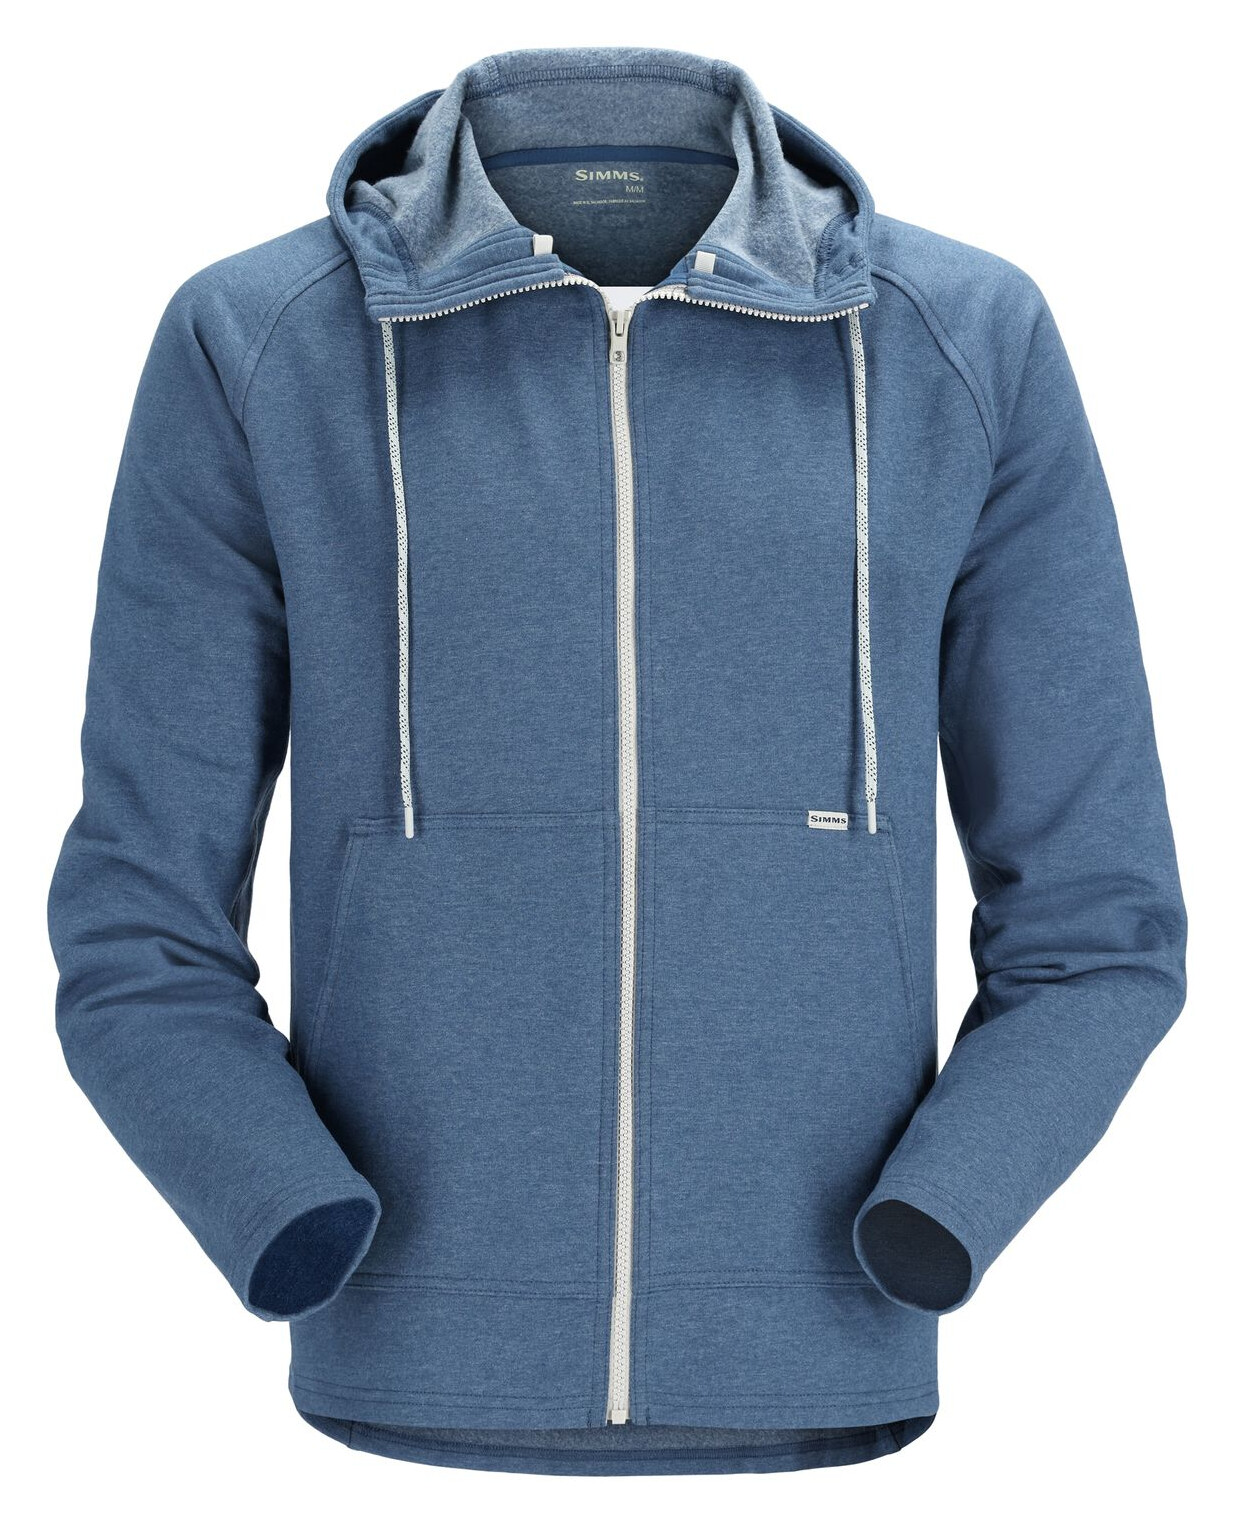 https://www.czechnymph.com/data/web/auto-imported-products/simms/simms-vermilion-full-zip-hoody-19a02c37.jpg